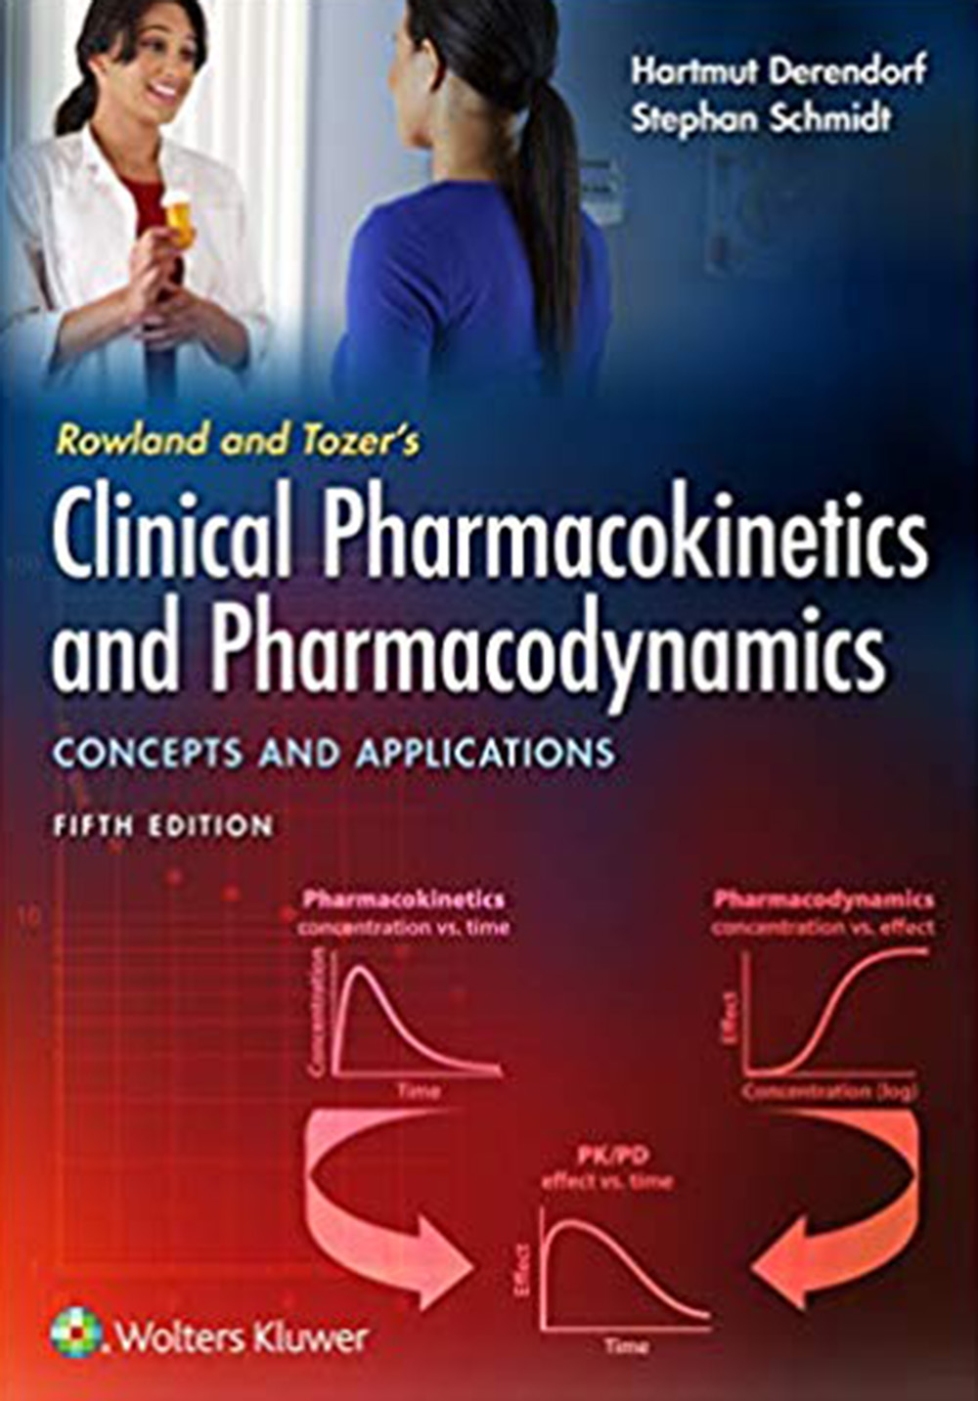 Rowland and Tozer’s Clinical Pharmacokinetics and Pharmacodynamics: Concept and Applications